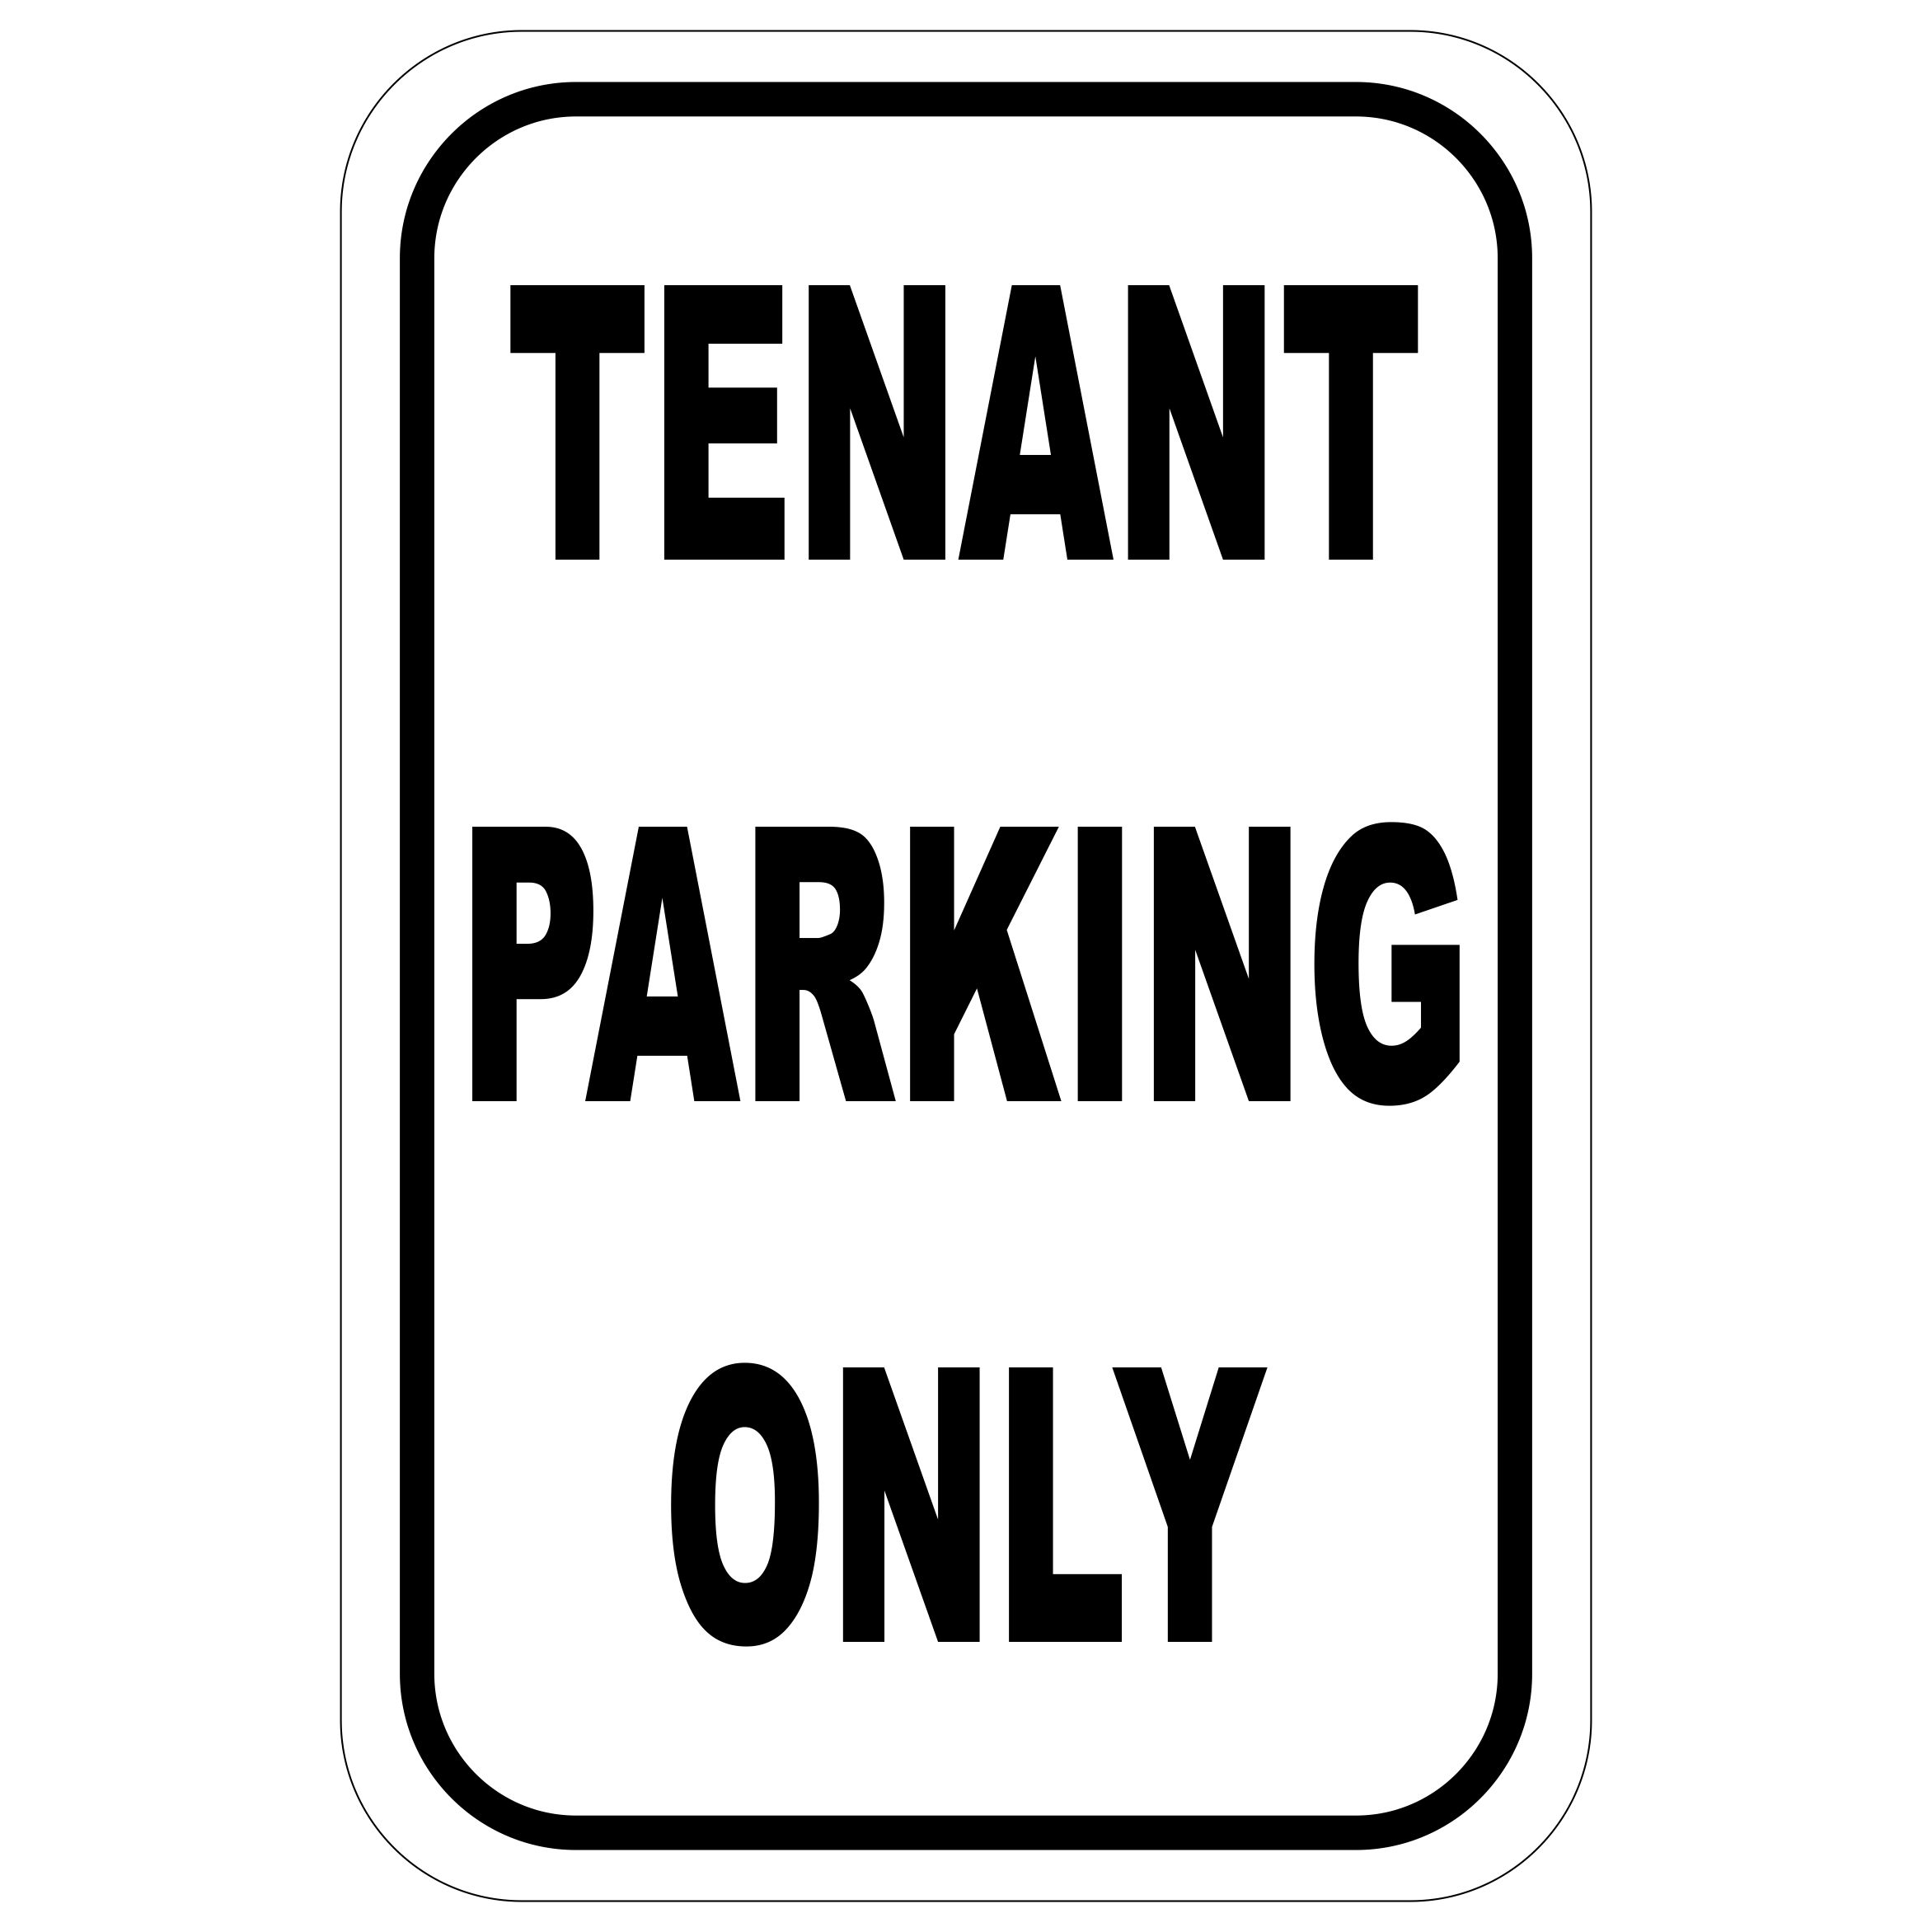 Window Business Sticker Set Tenant Parking Only Sign 